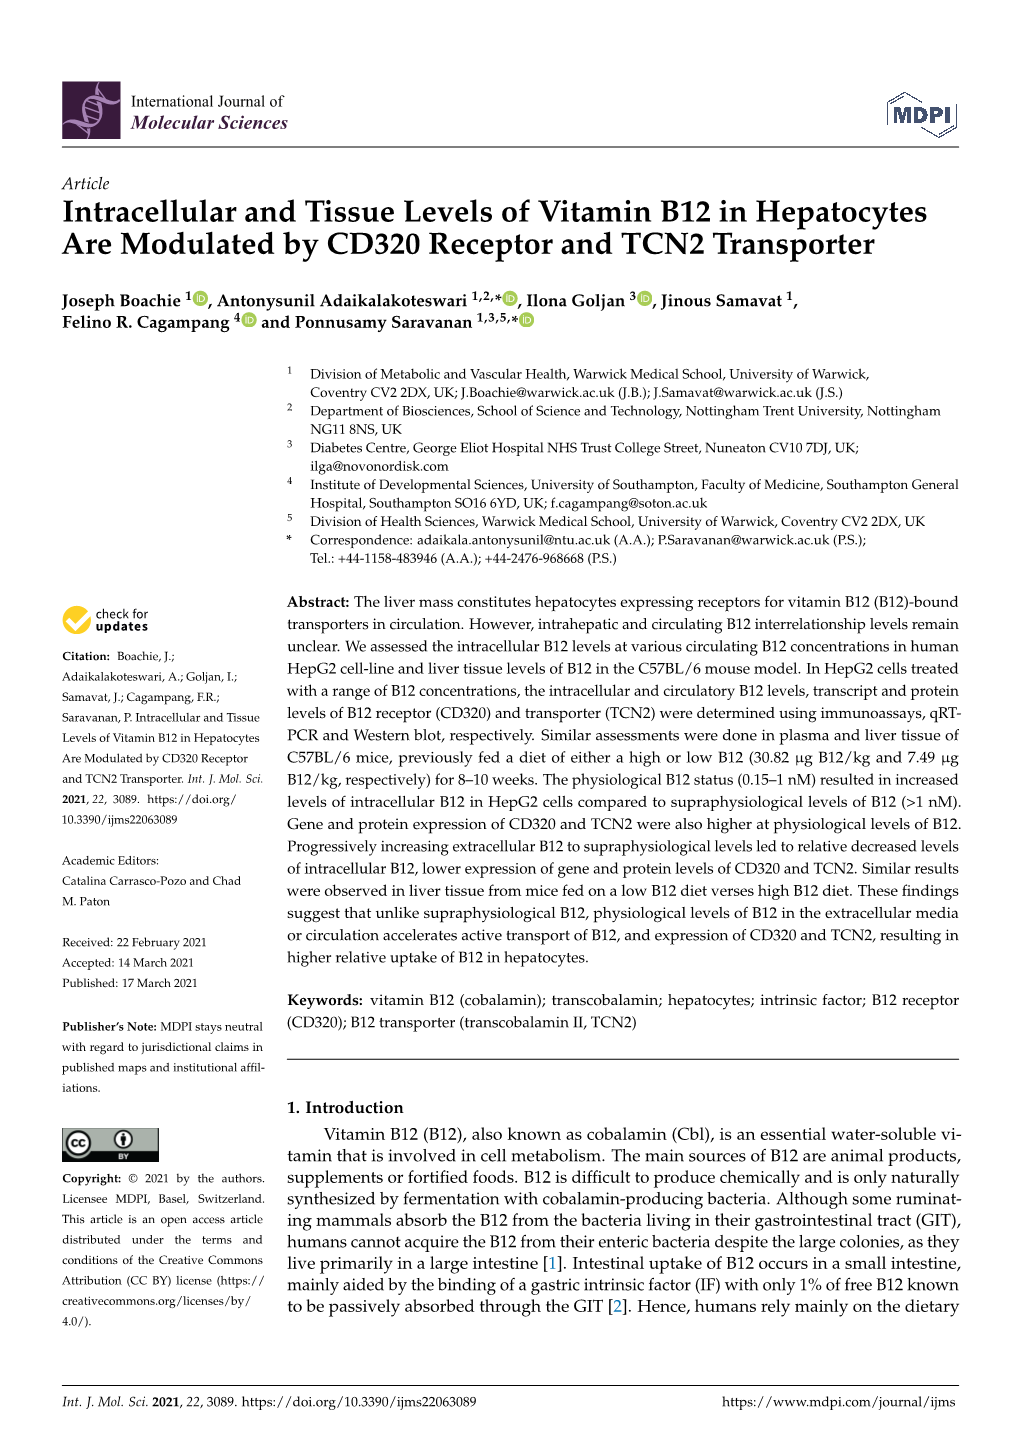 Intracellular and Tissue Levels of Vitamin B12 in Hepatocytes Are Modulated by CD320 Receptor and TCN2 Transporter